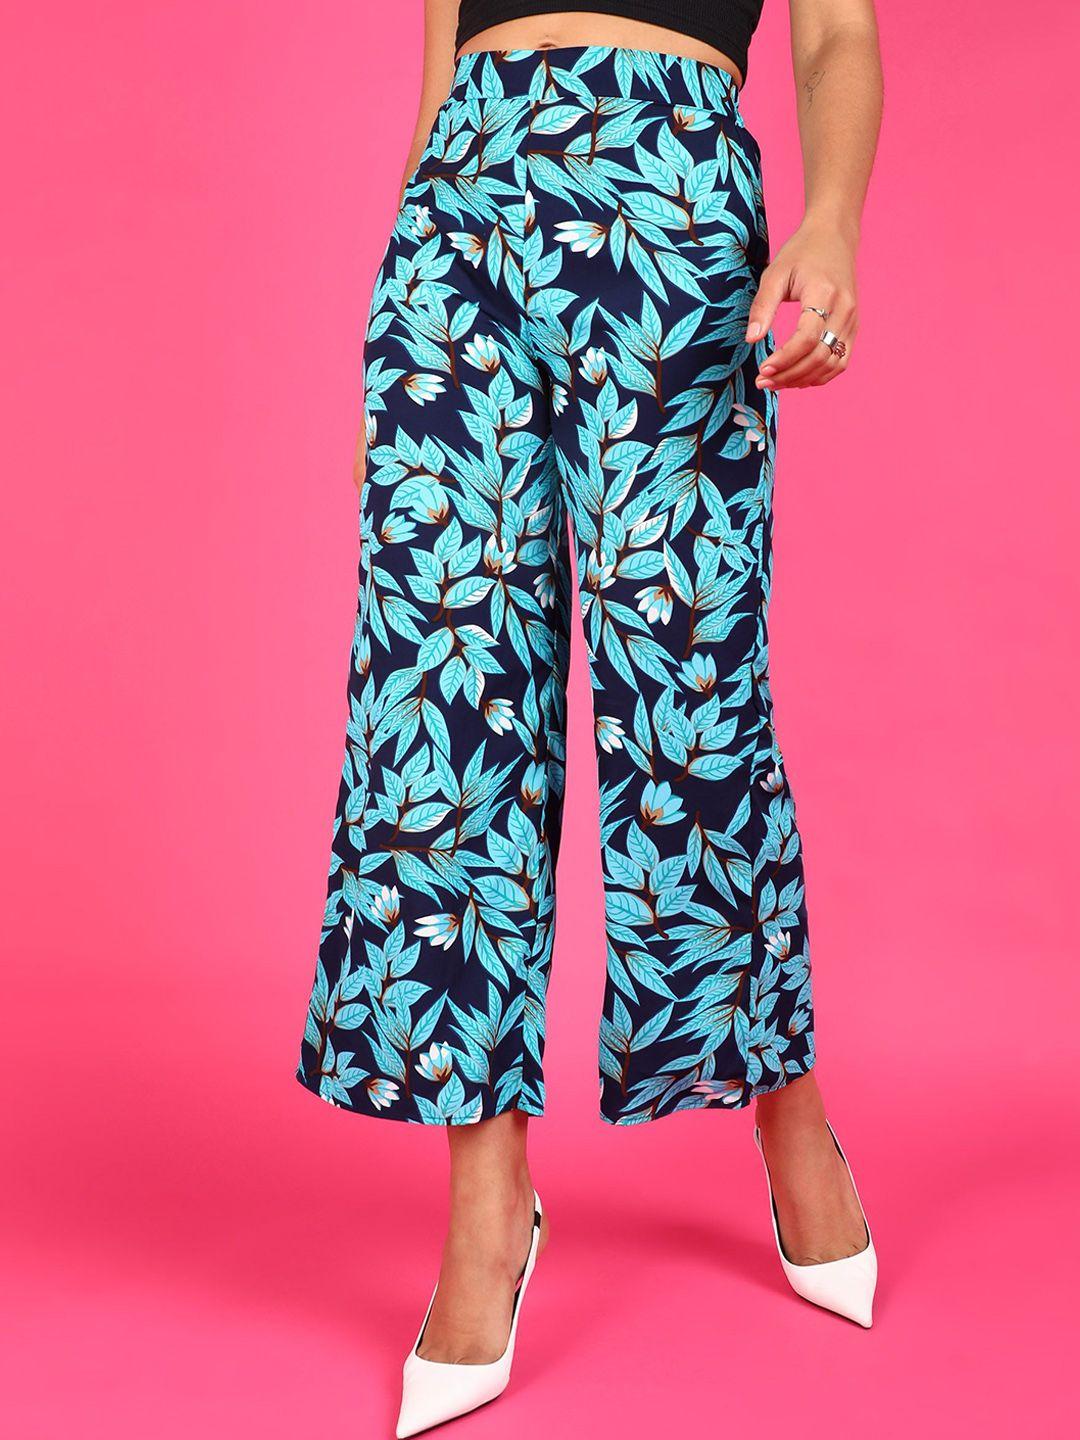 popwings-women-floral-printed-smart-loose-fit-easy-wash-culottes-trousers